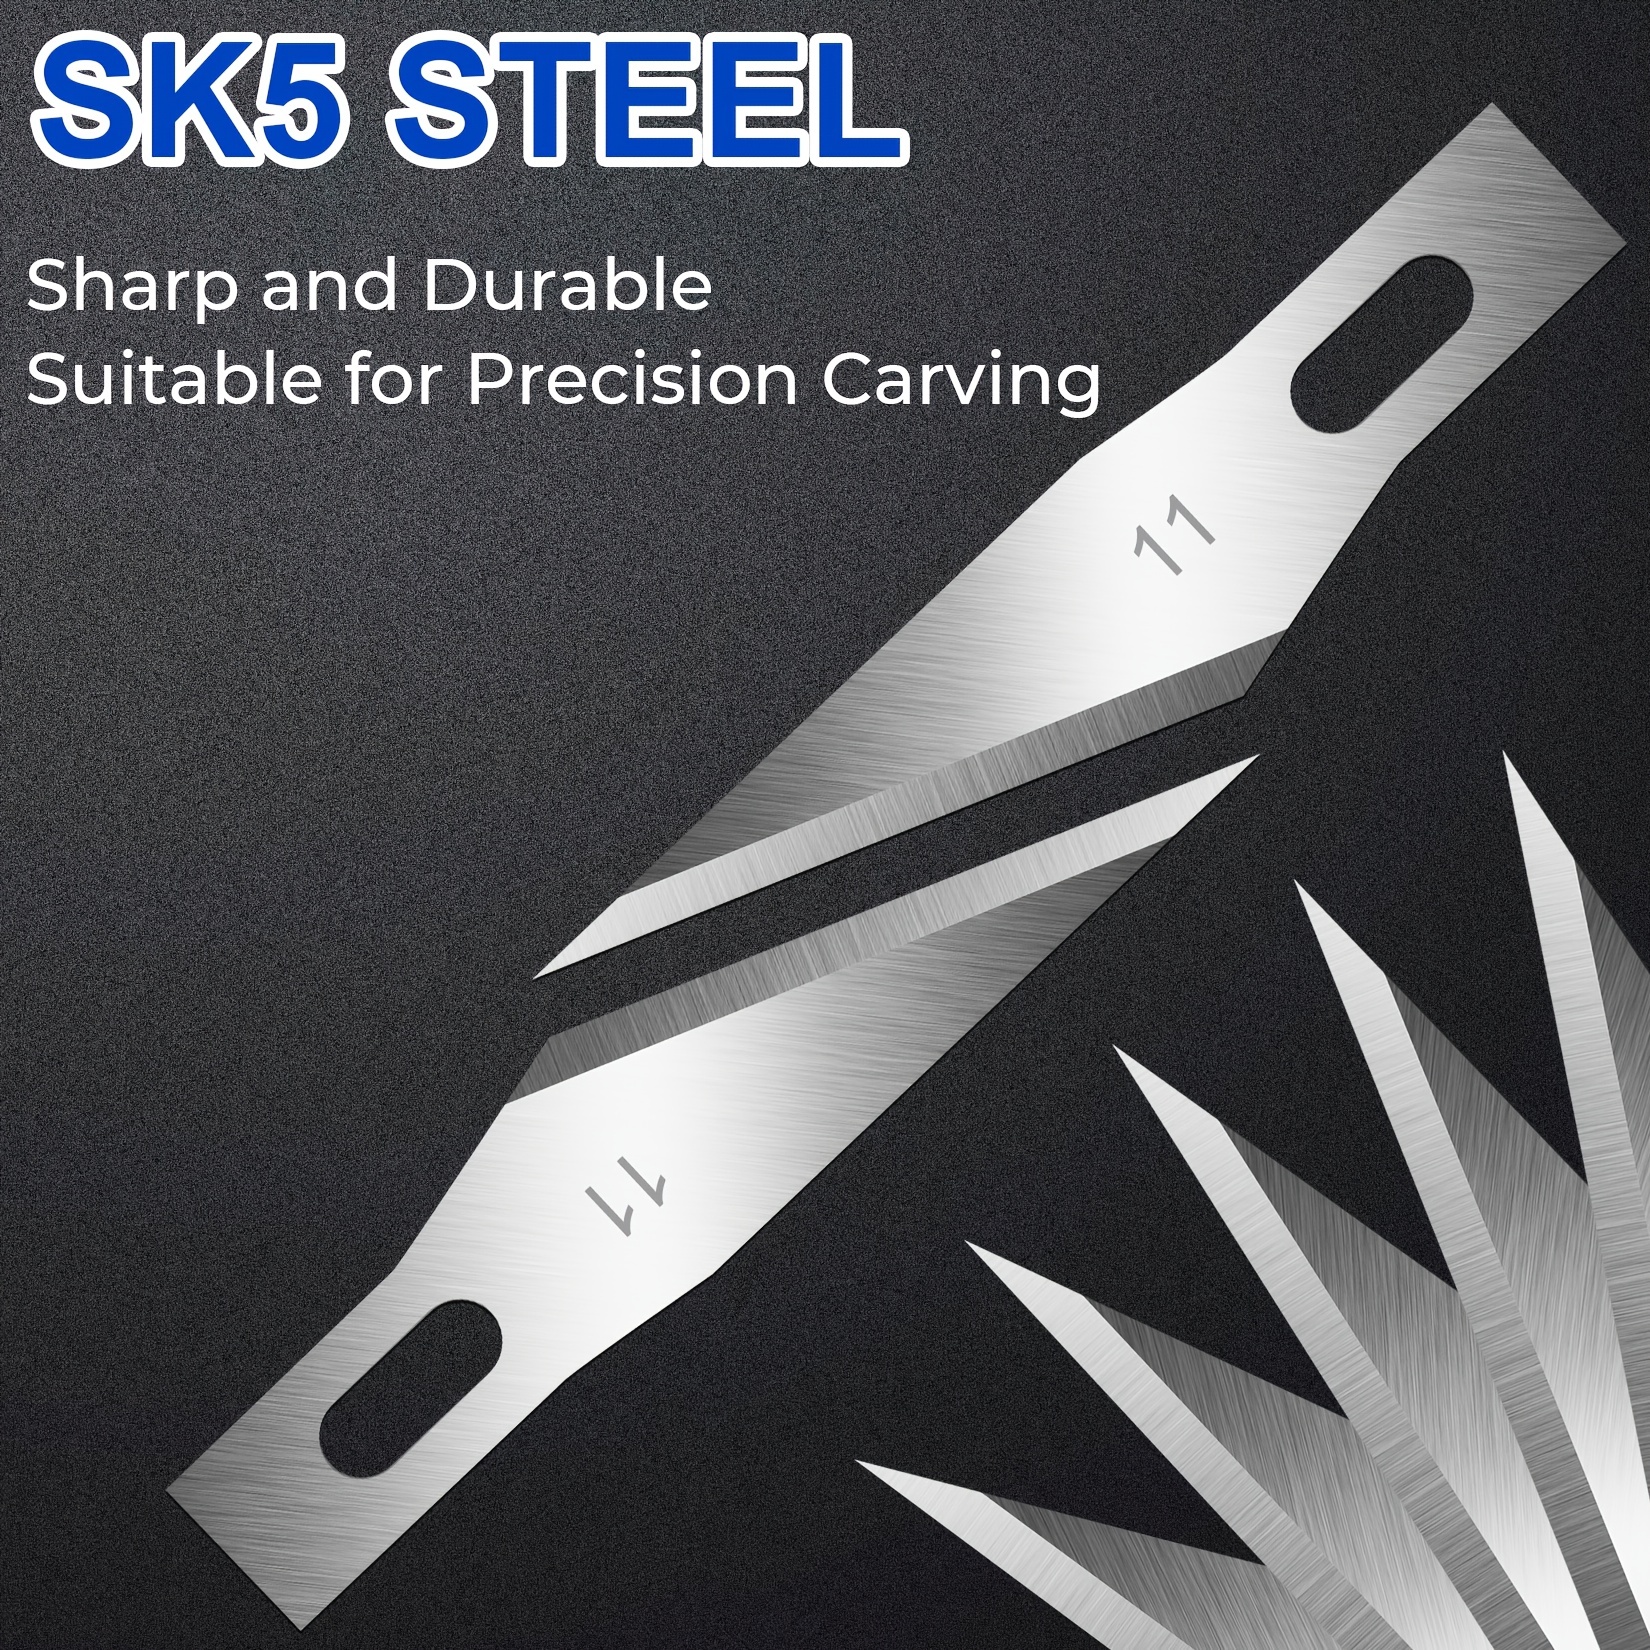  DIYSELF 20PCS Craft Knife Blades, SK5 Carbon Steel #11 Exacto  Knife Blades Refill Hobby Art Blades Exacto Blades Cutting Tool with  Storage Case for Craft, Hobby, Scrapbooking, Stencil : Arts, Crafts